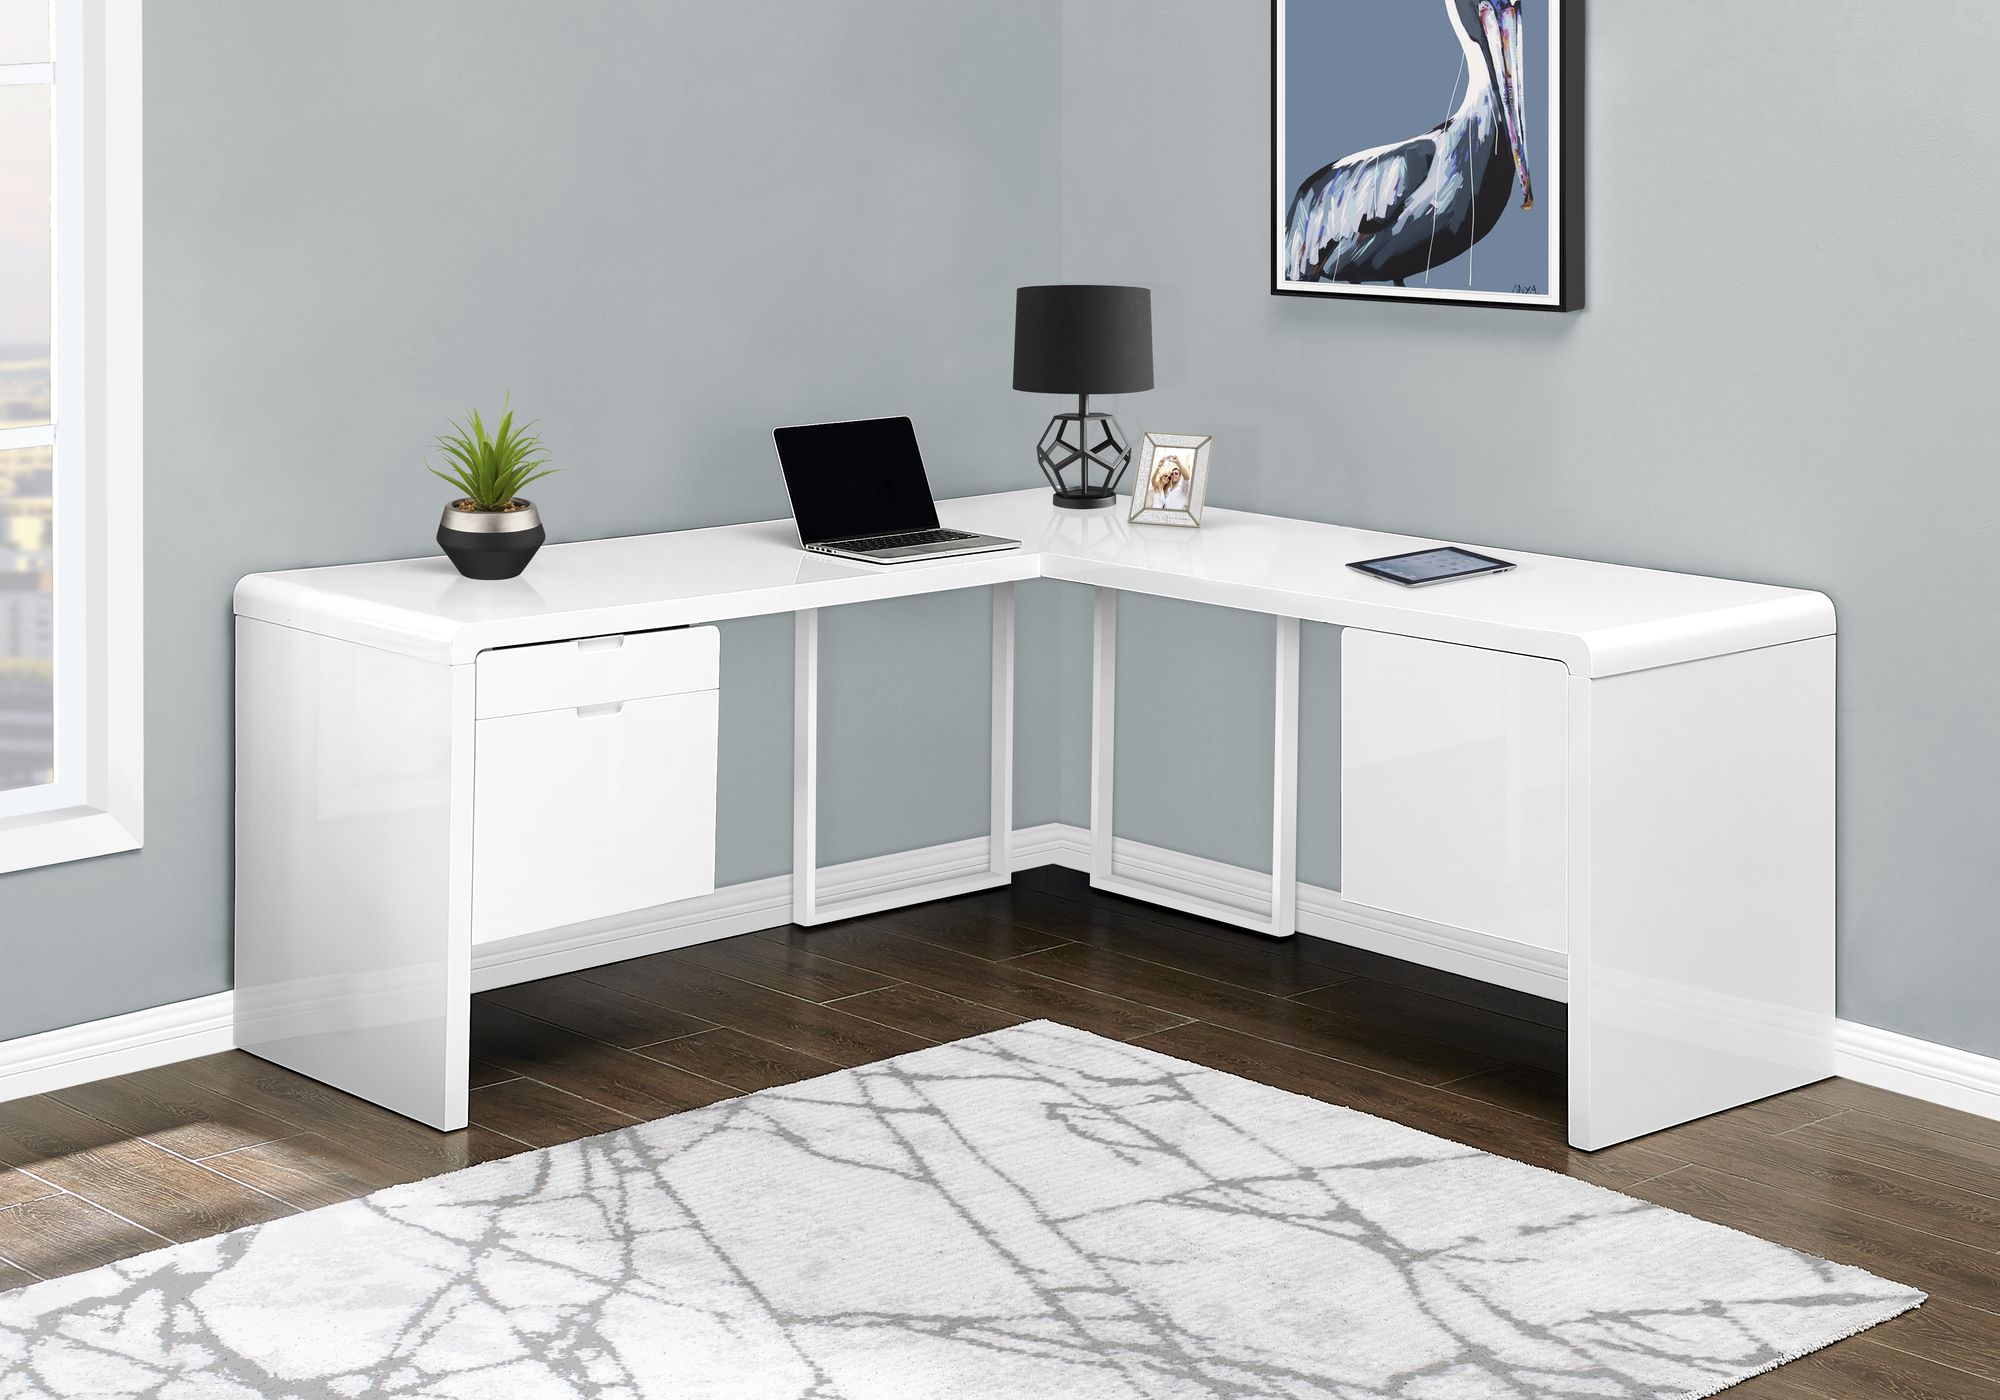 I 7582 - COMPUTER DESK - 72"L / HIGH GLOSSY WHITE LEFT/ RIGHT FACE BY MONARCH SPECIALTIES INC